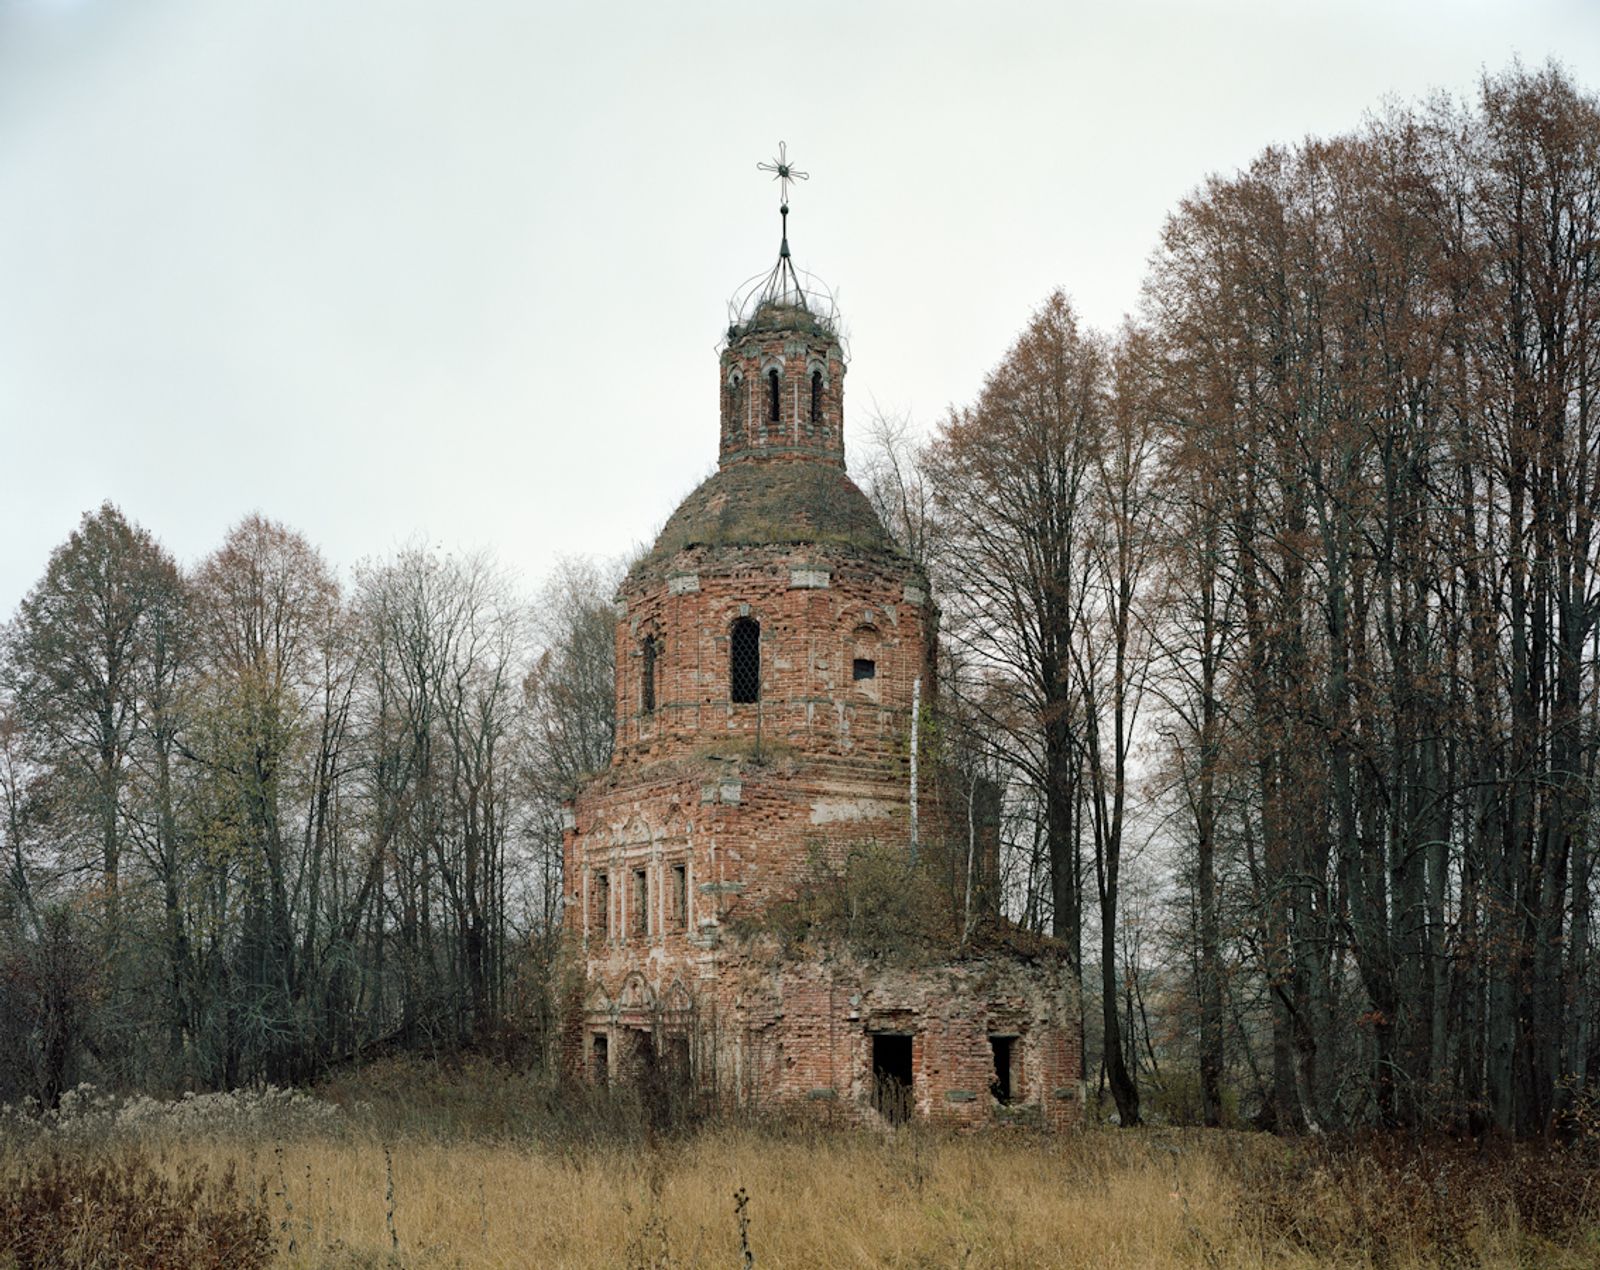 © Petr Antonov - Church of Our Lady of Kazan in the village of Bogorodskoe. The church was built in 1721 and closed in the 1920s.